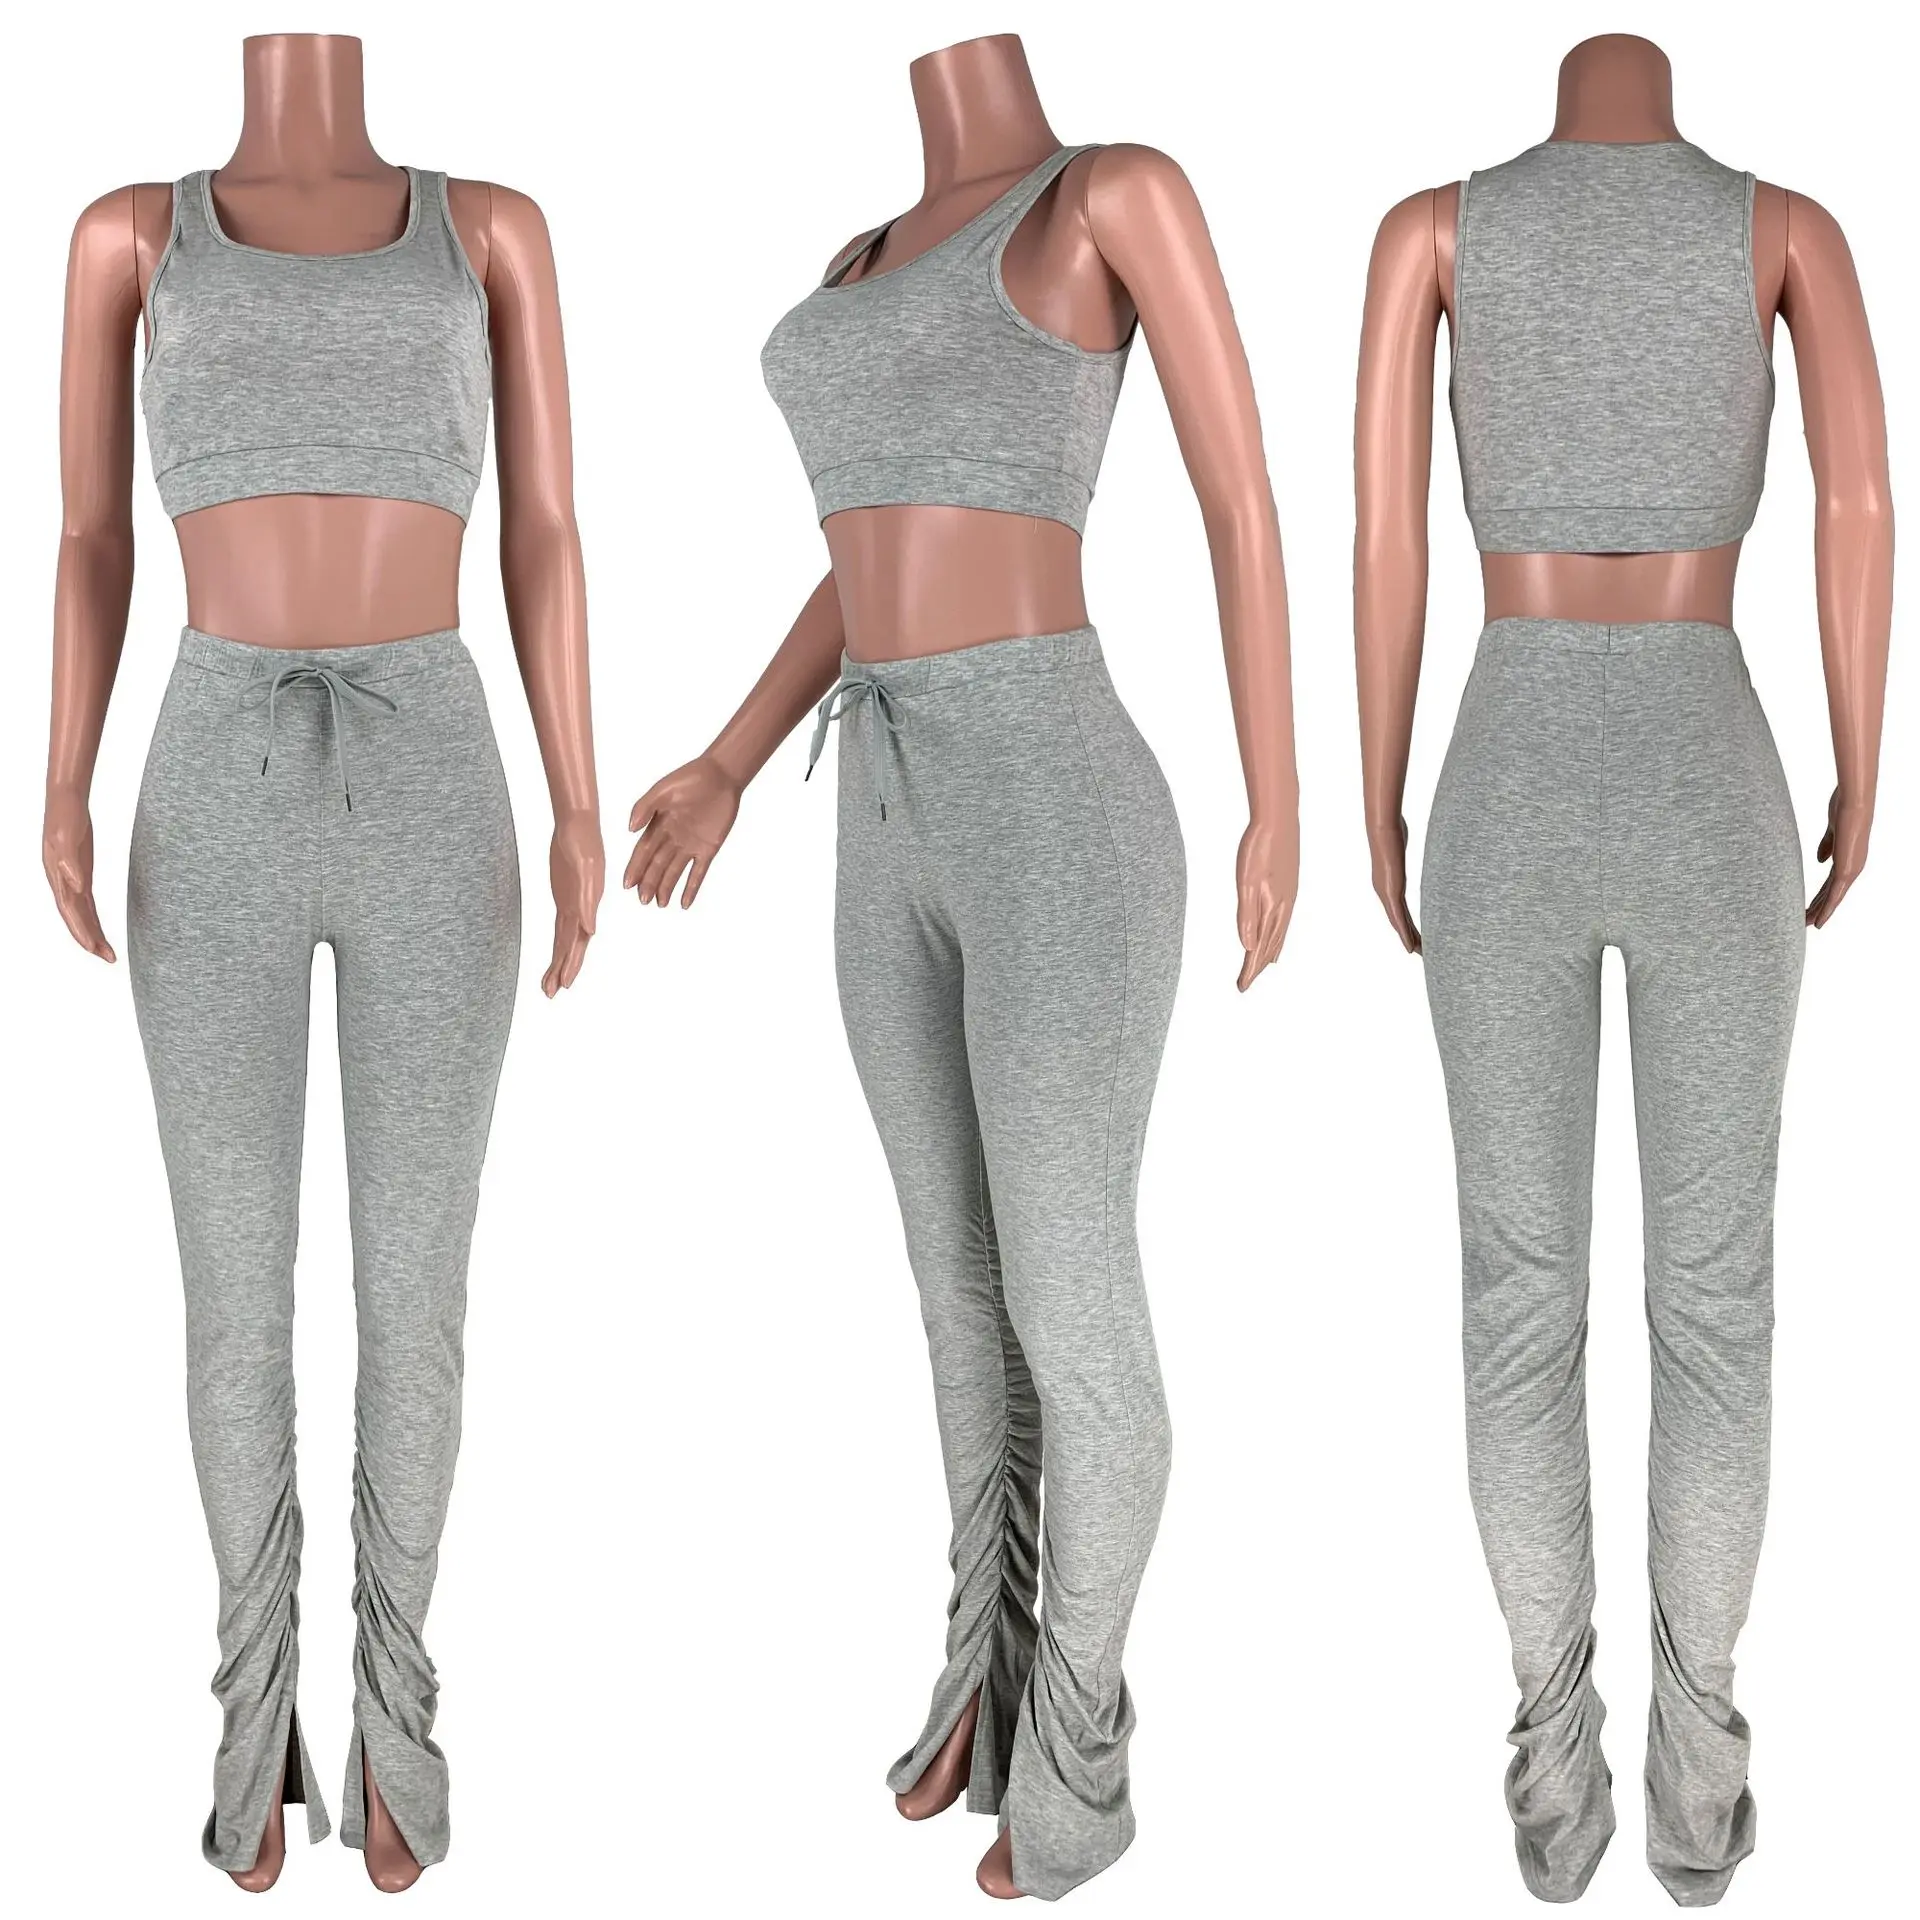 HR8112 Tank top single stacked legging sport suit cotton 2 piece women set sexy fitness clothing sweatsuit sets